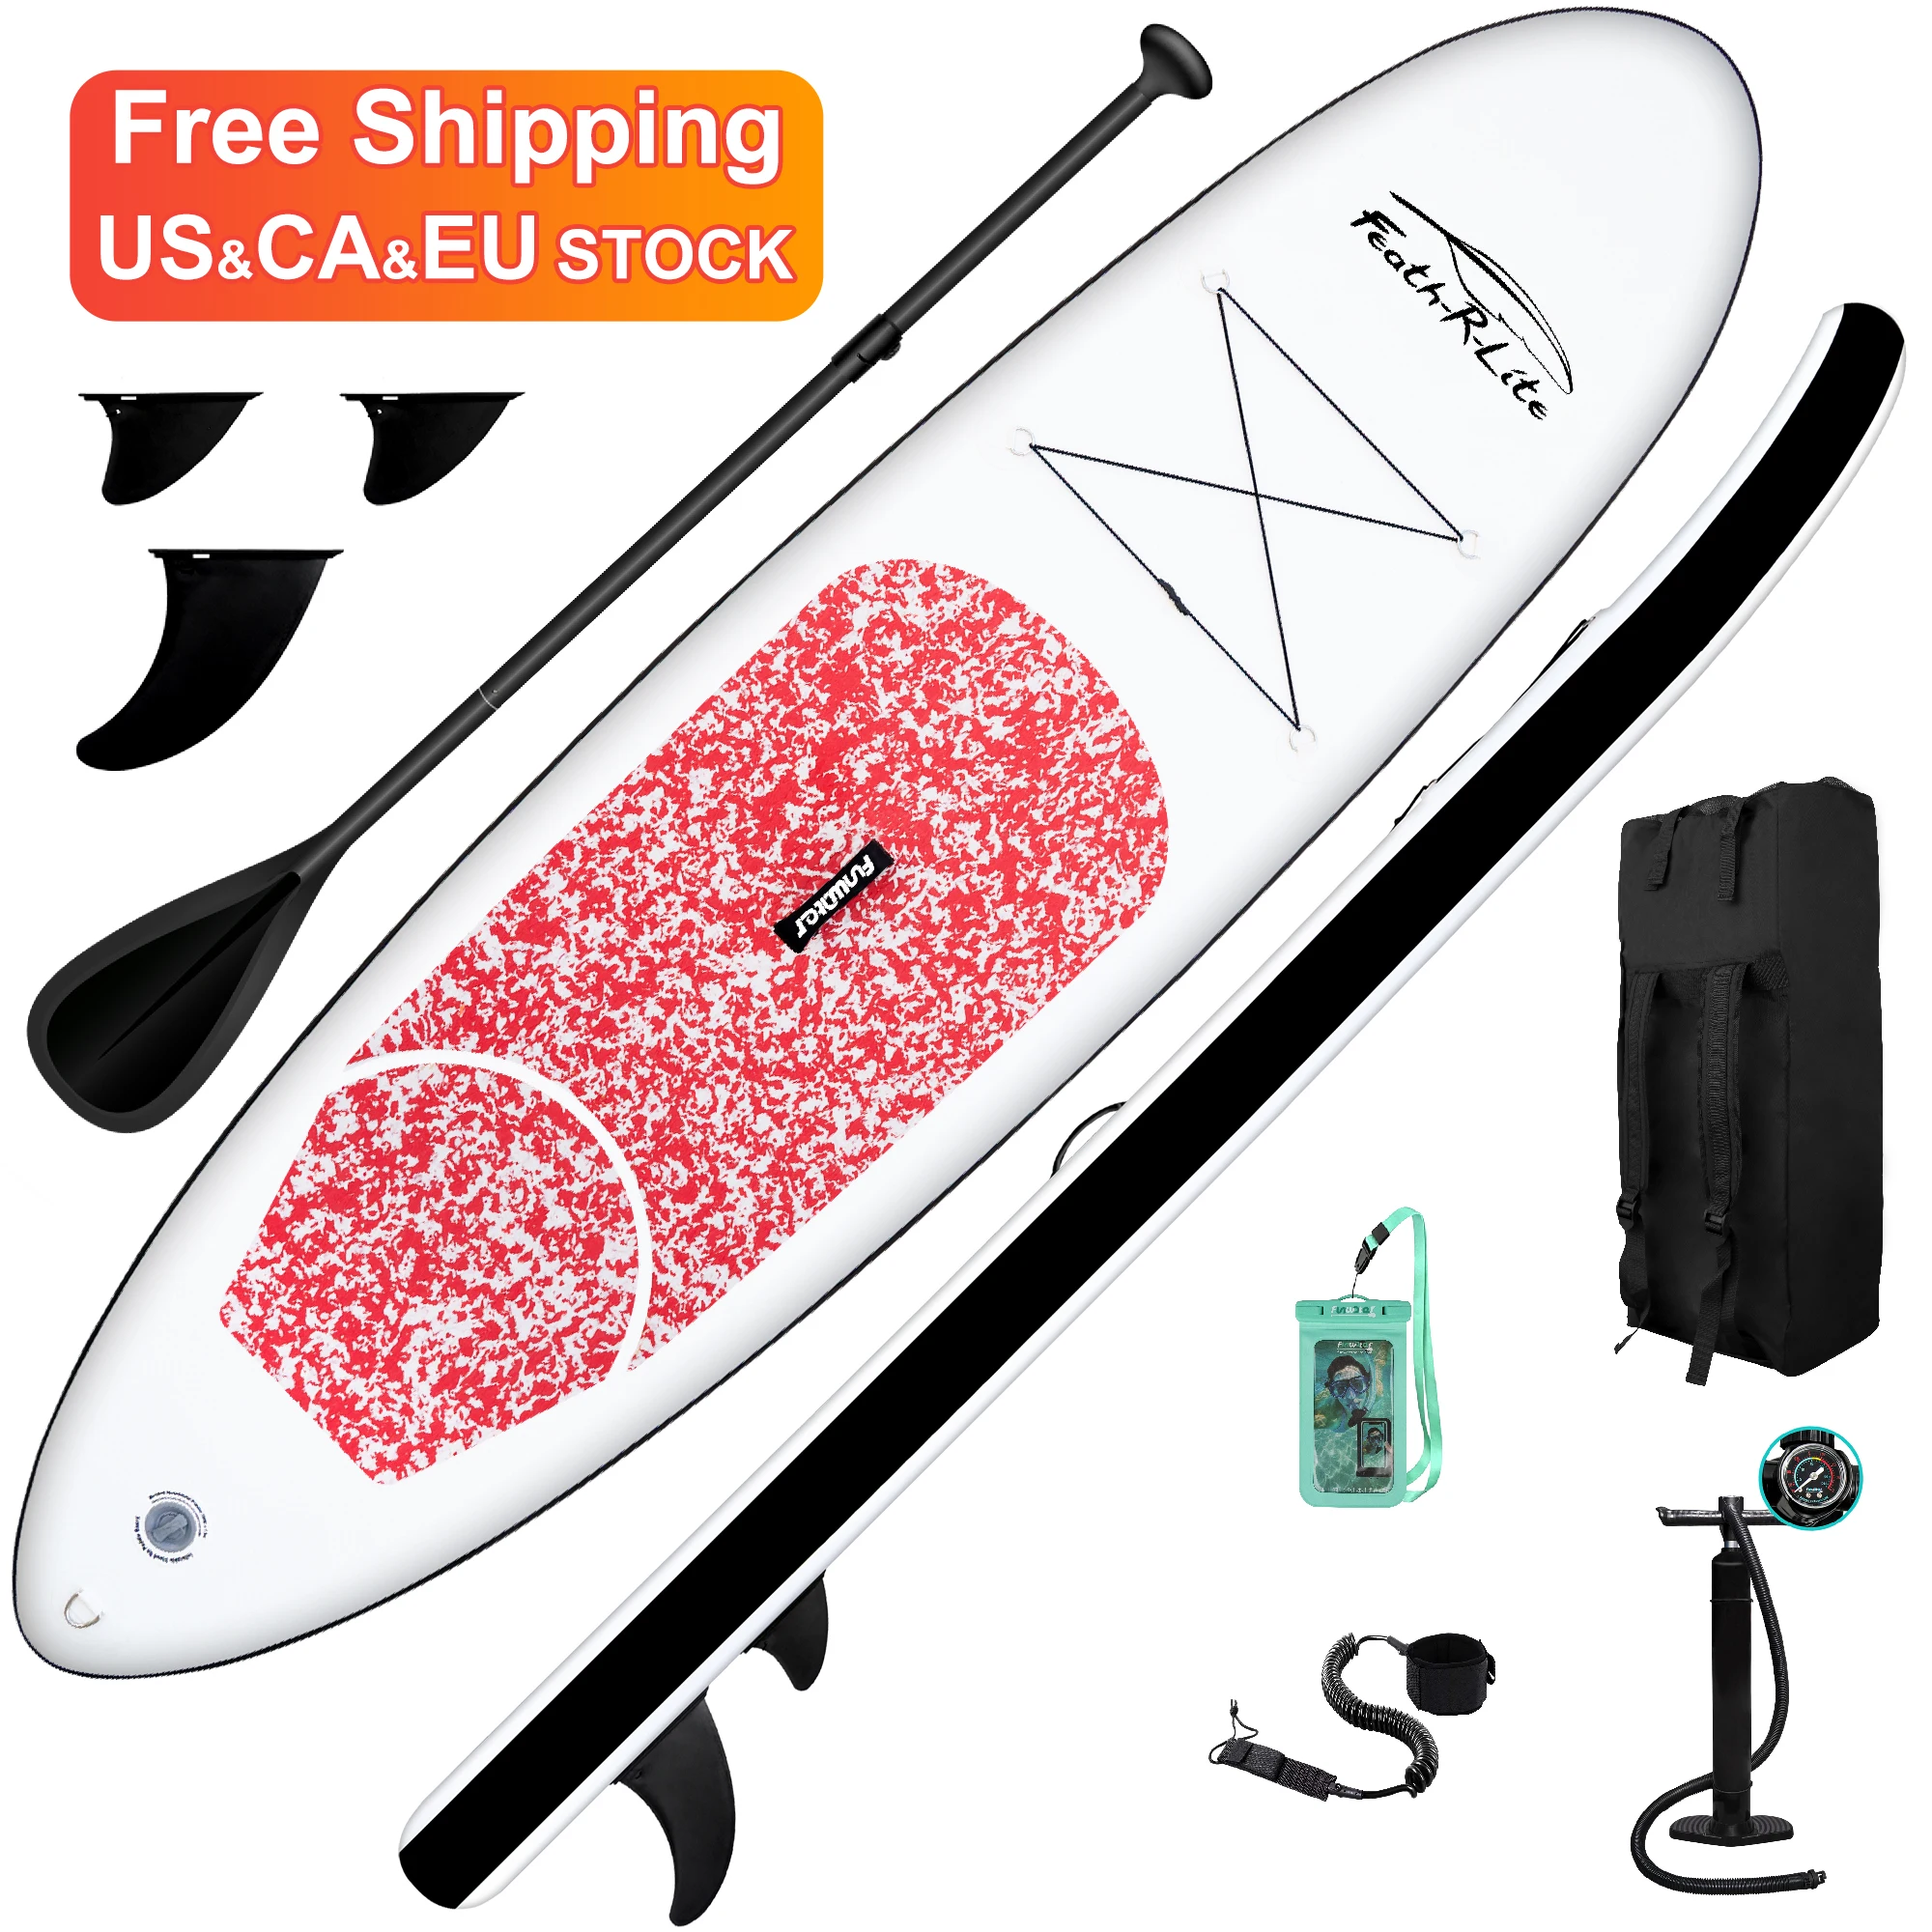 

FUNWATER Free Shipping Dropshipping OEM 10' inflatable sup board surfboard standup paddleboard watersports equipment fanatics